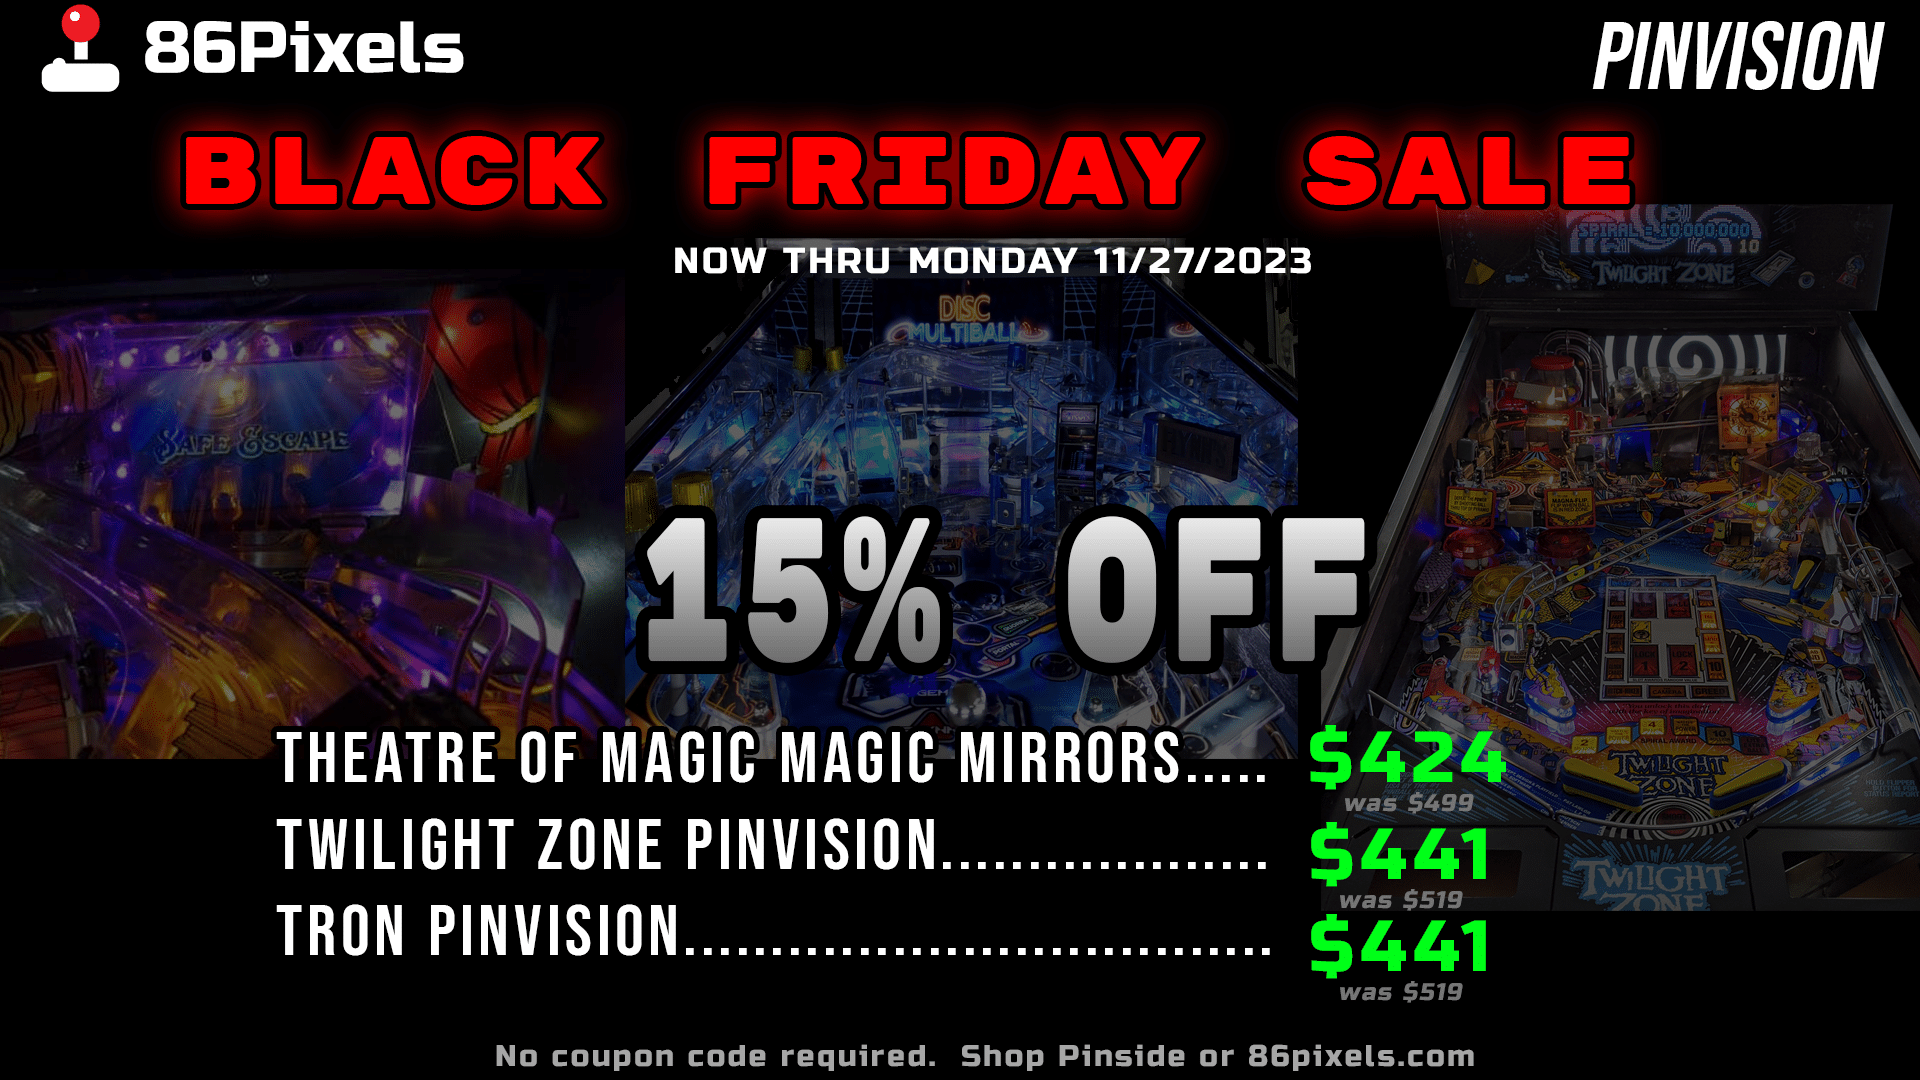 Black Friday Sale - 15% OFF Pinvisions!